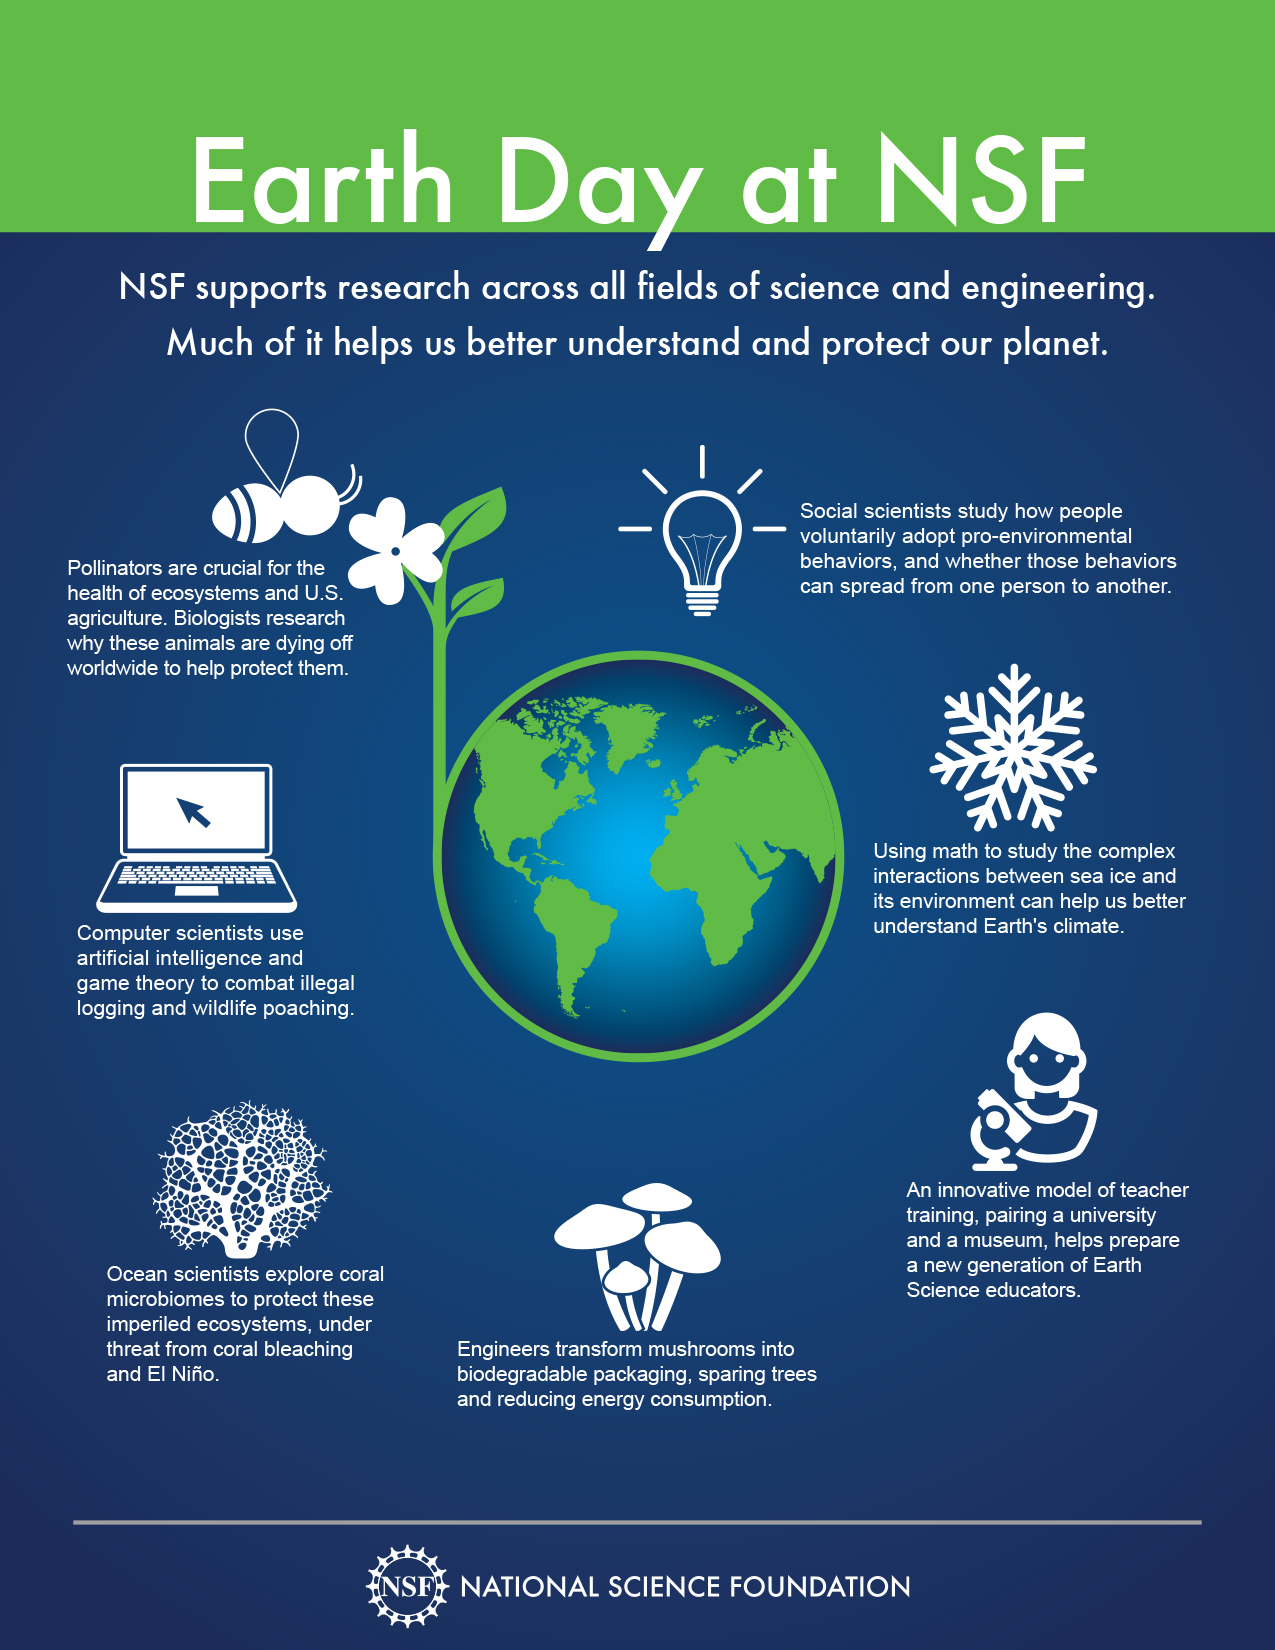 Swanson Health Celebrates Earth Day with Eco-friendly Initiatives that Could Power a Small Village